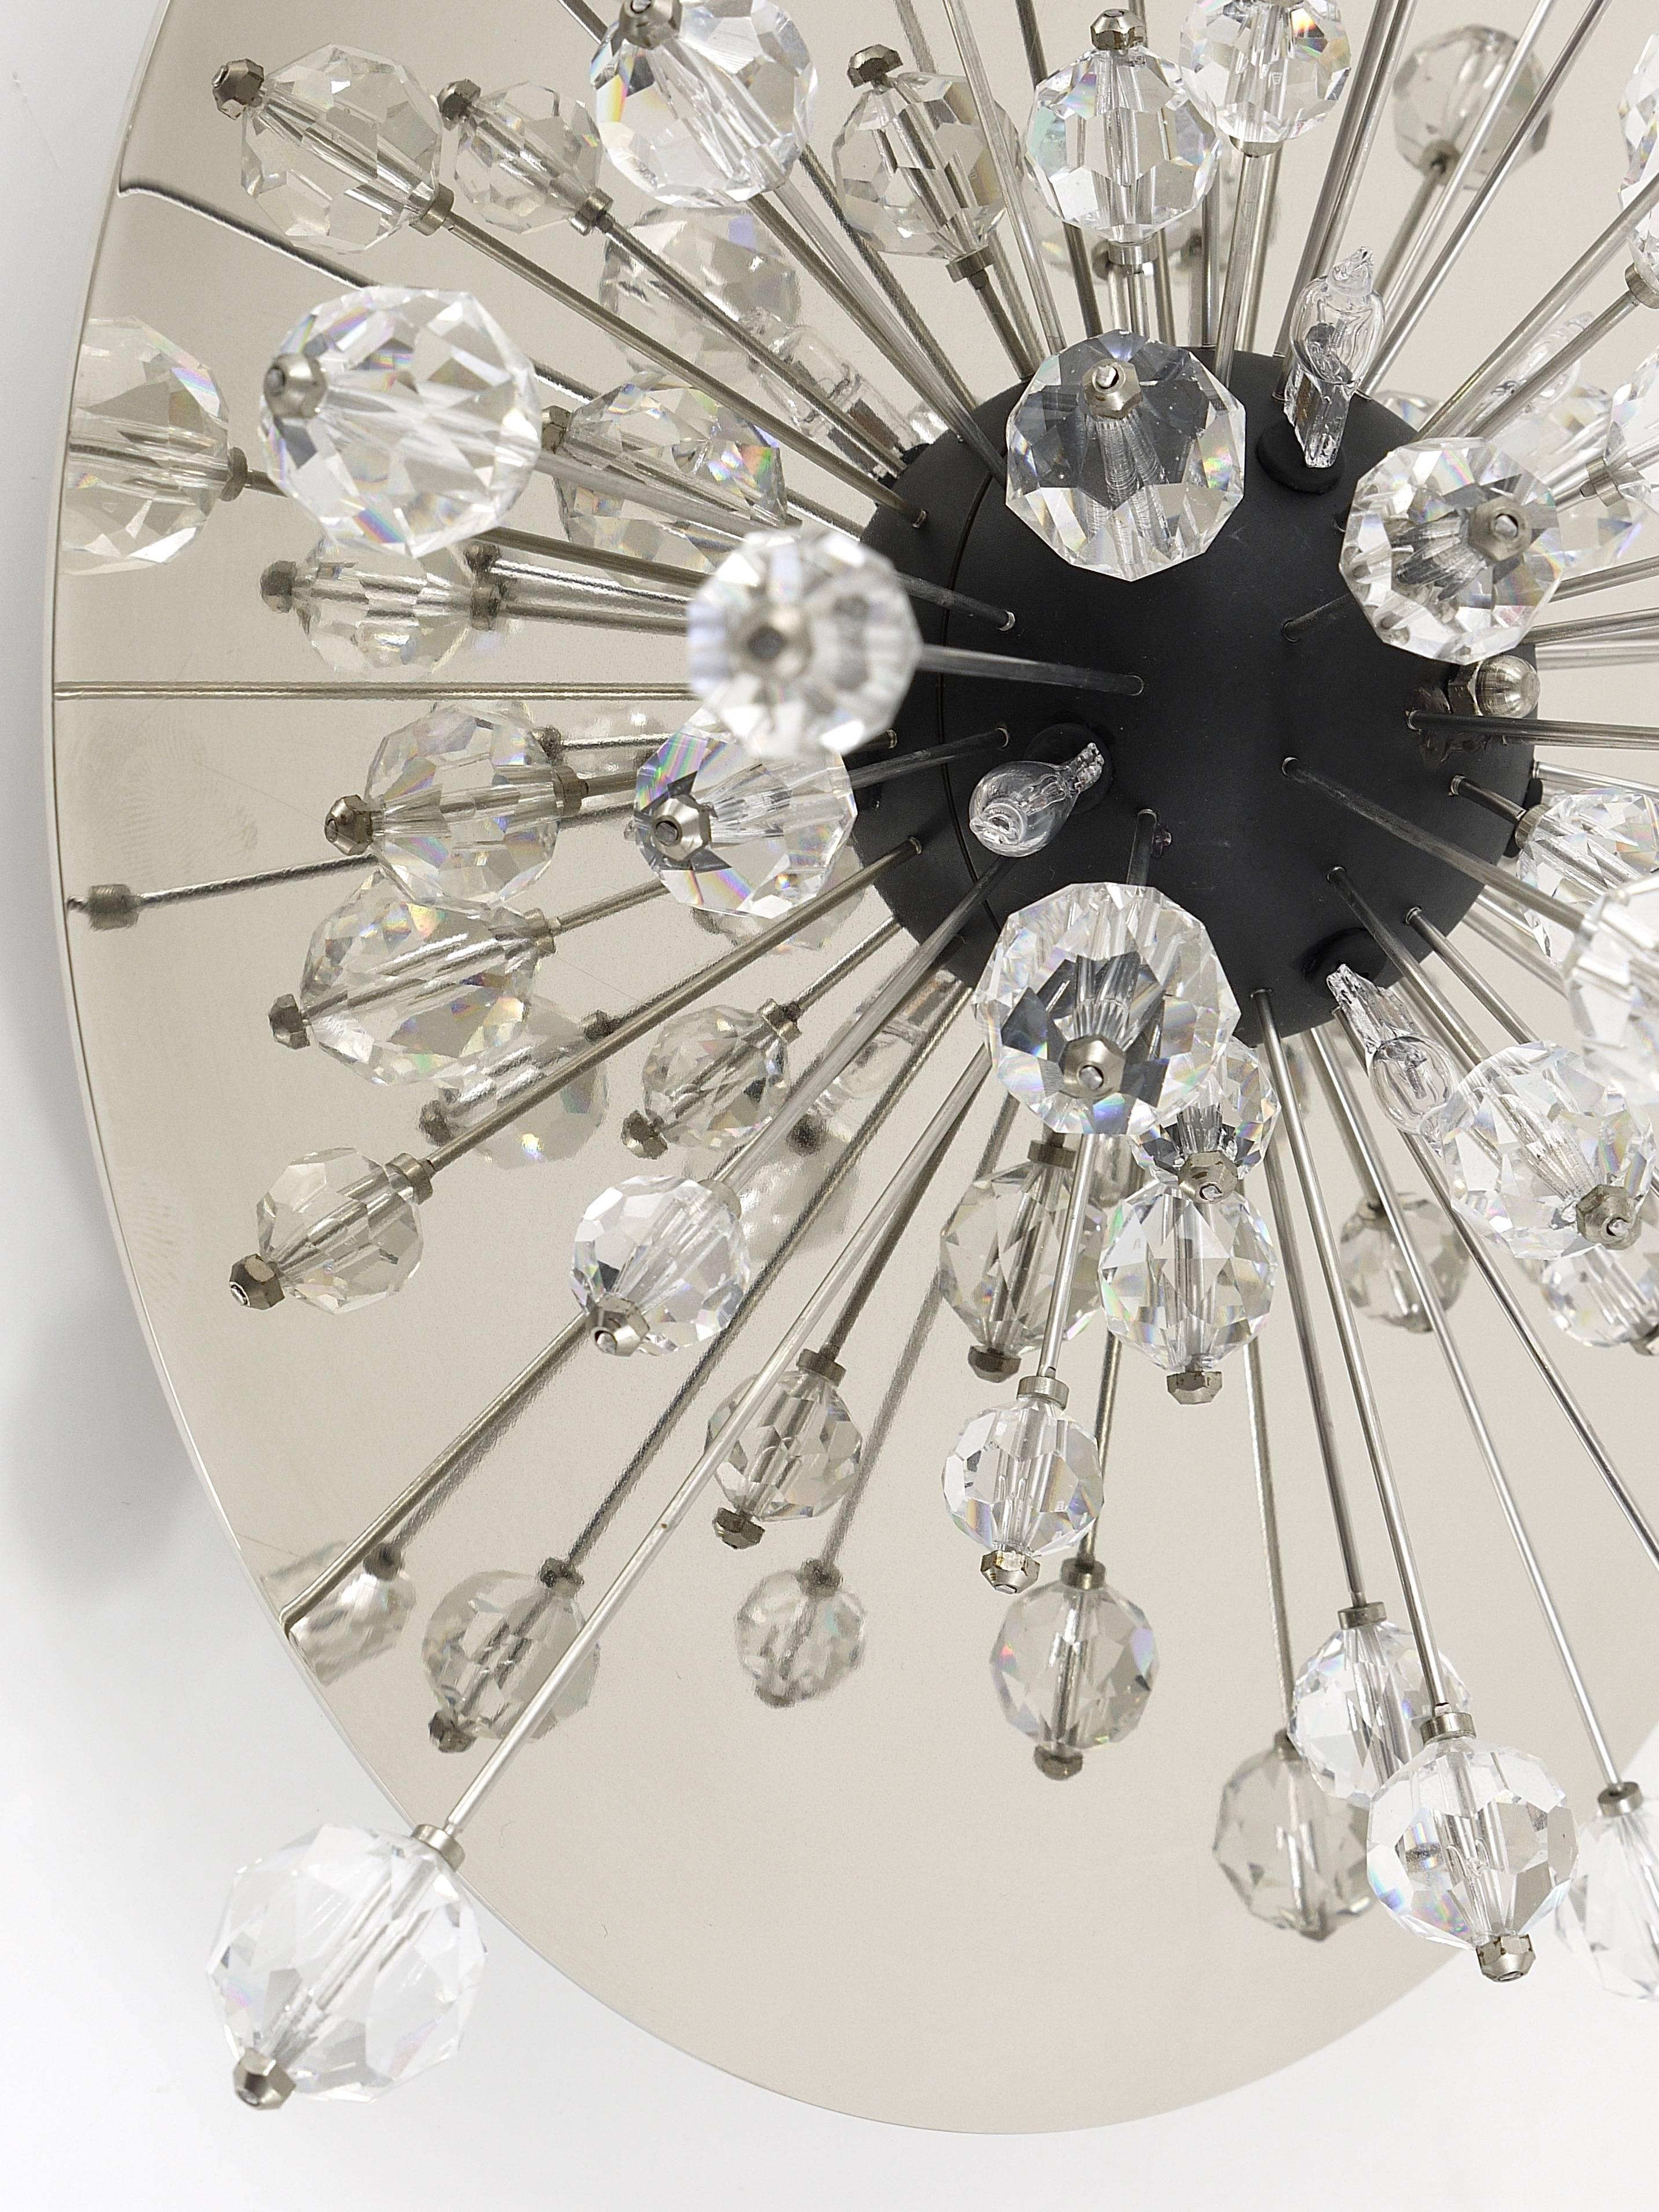 Up to two custom-made Mid-Century Modern Sputnik lights, designed and crafted by J. & L. Lobmeyr in Austria, are available. These versatile lights can be installed as either wall or ceiling fixtures / flush mounts. Each features a round,